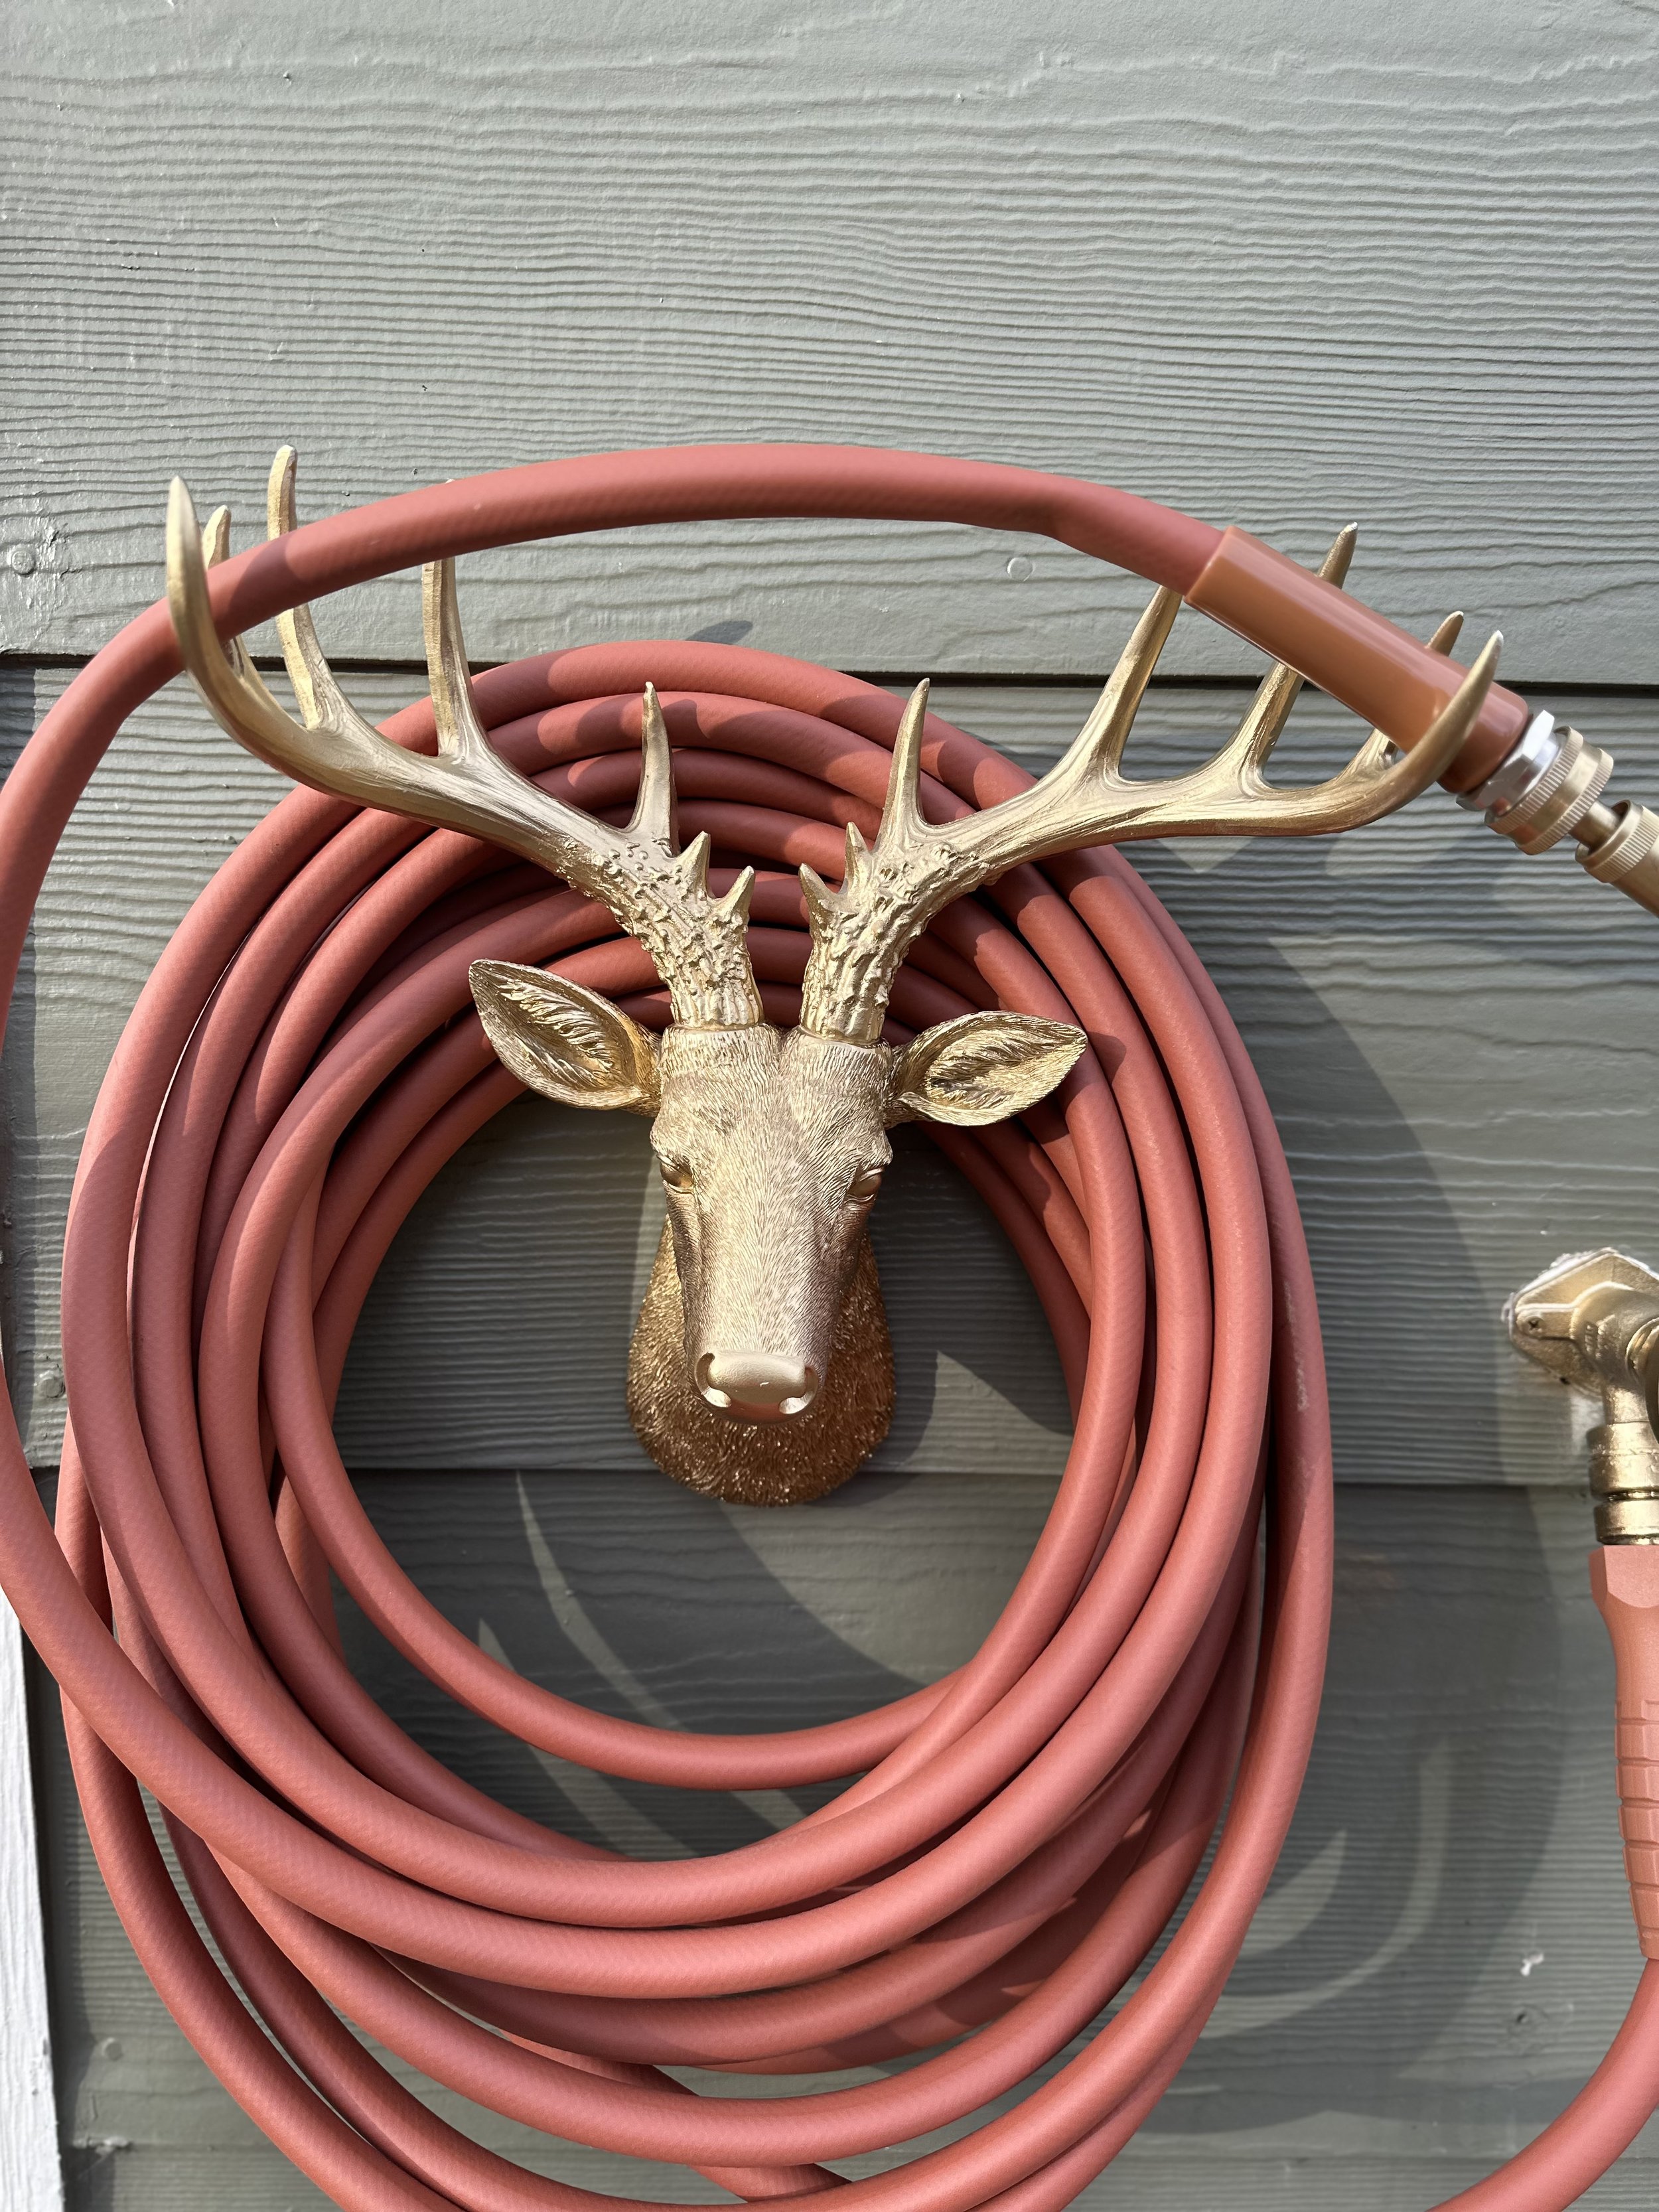 How To Make Your Garden Hose and Spigot Look Fancy — Maggie McGaugh